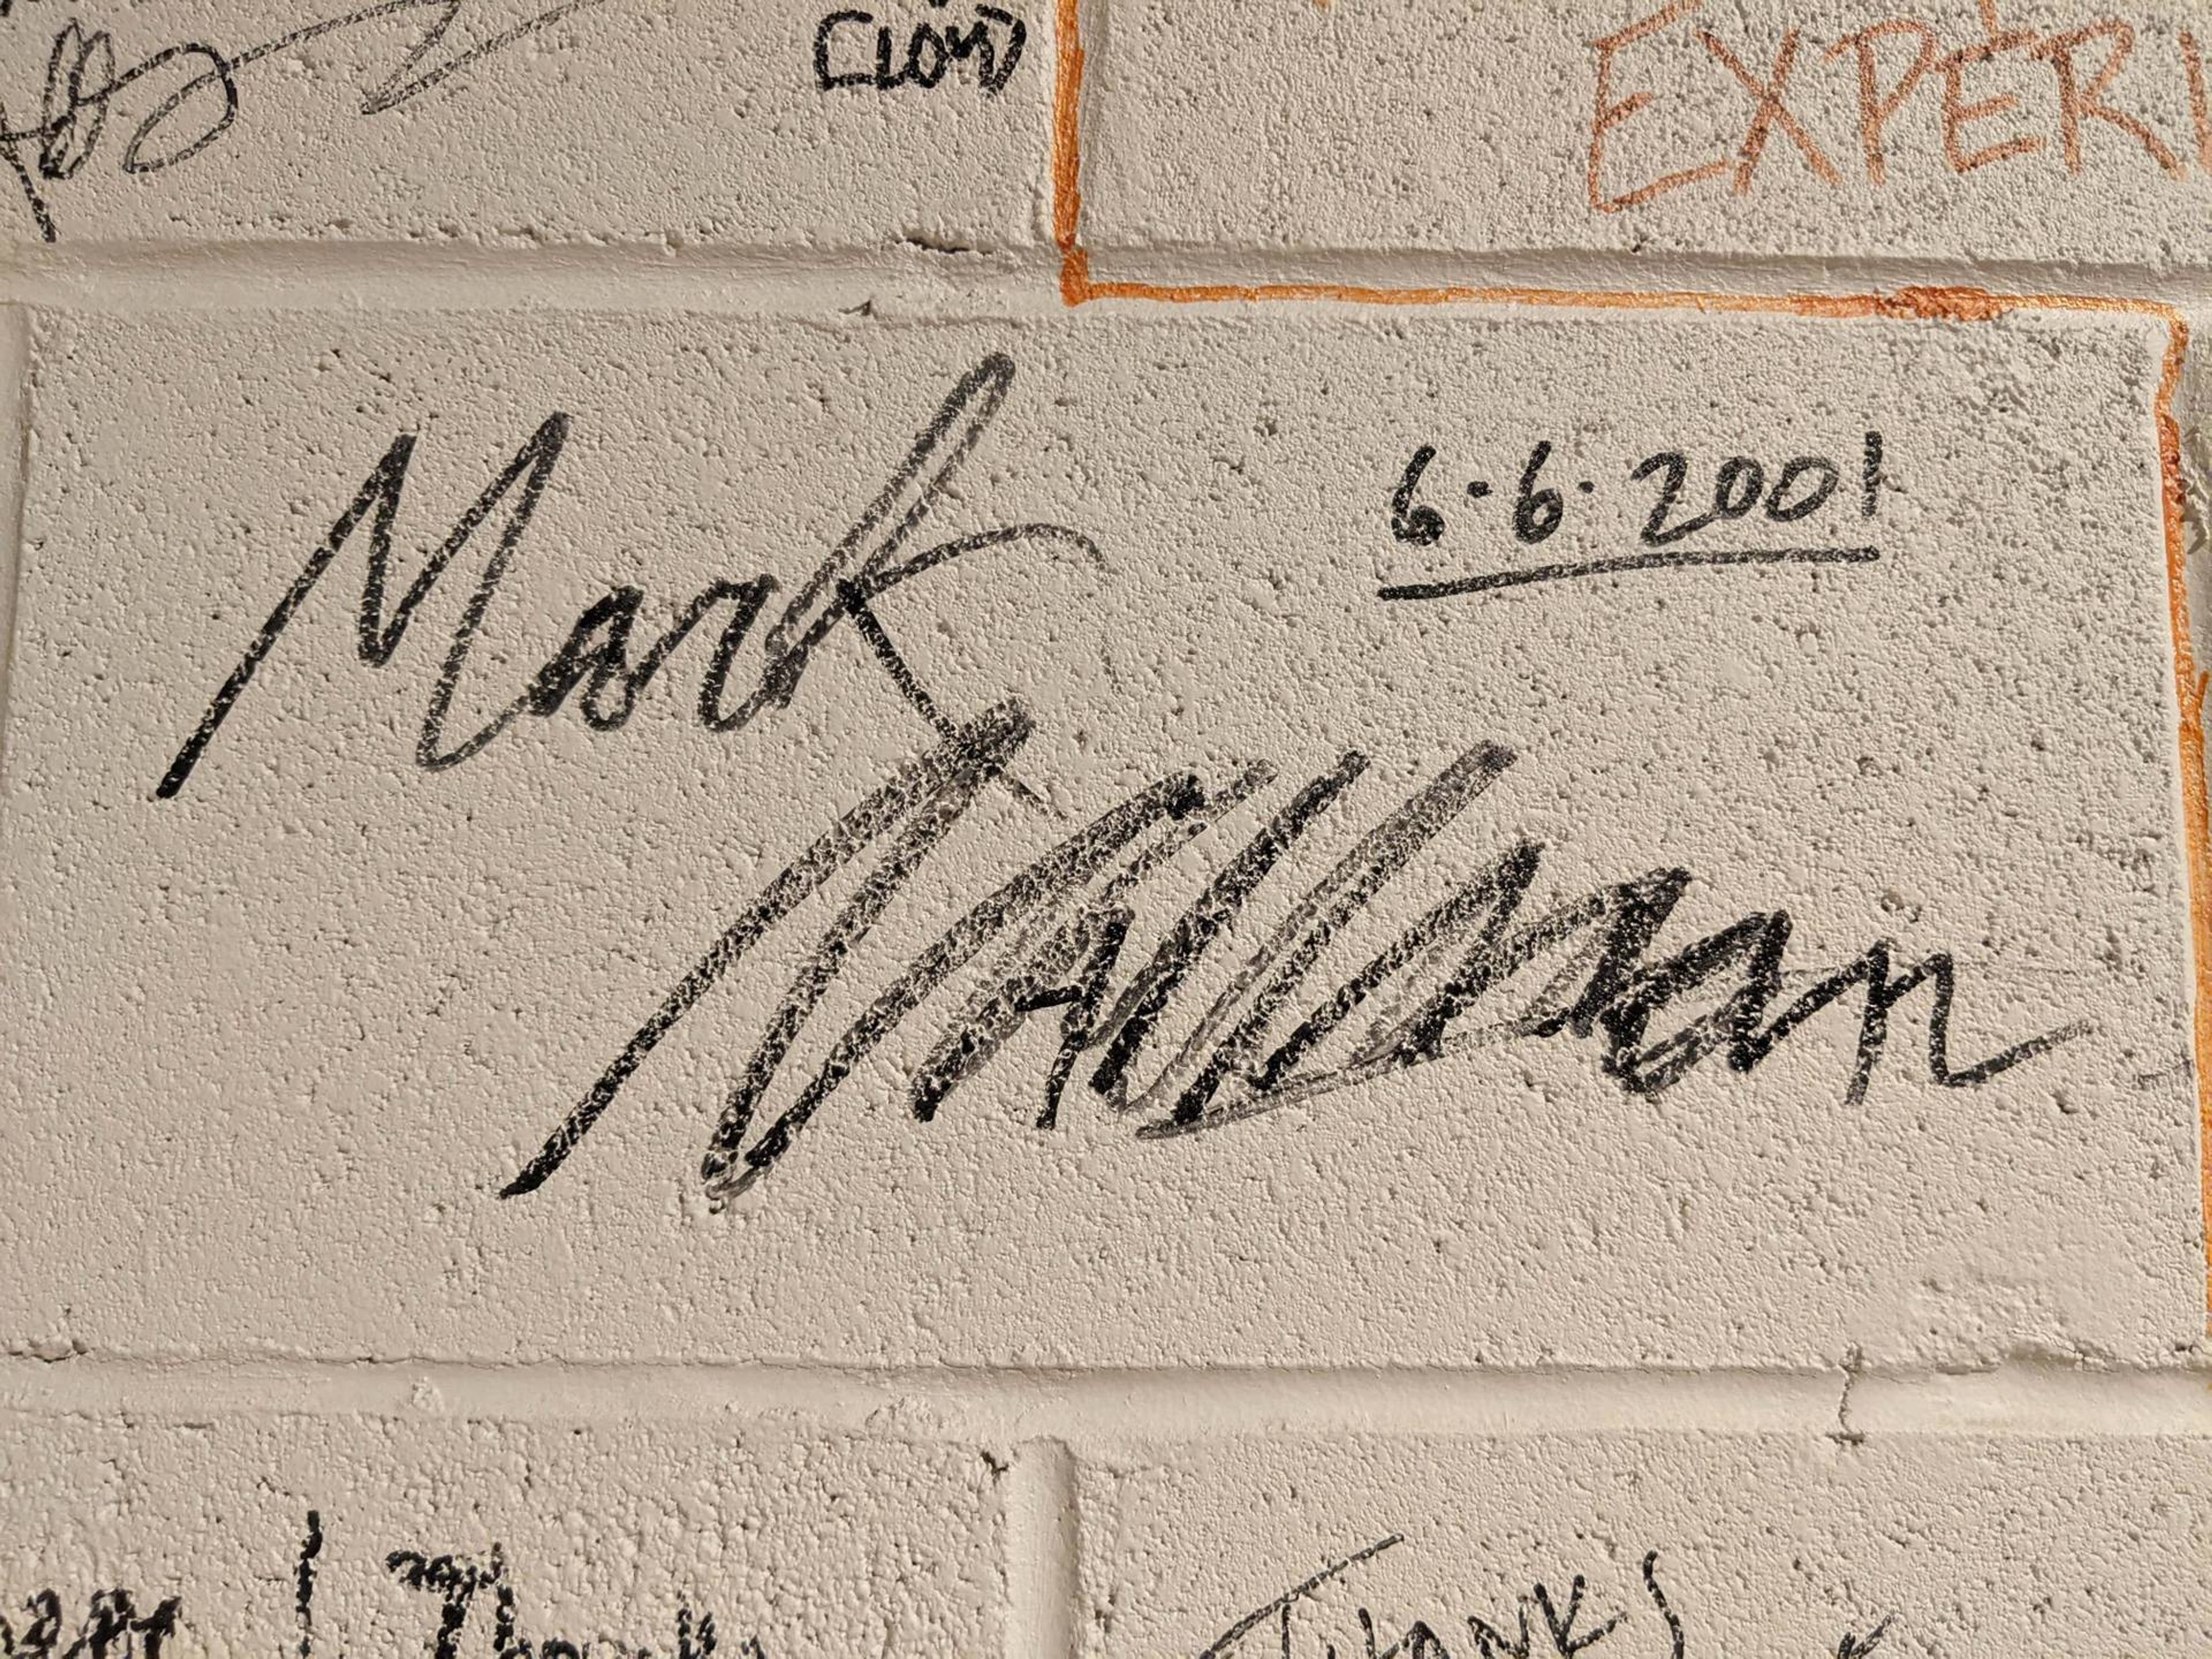 Mark Mallmaln's signature on the wall at Twin Cities PBS in St. Paul